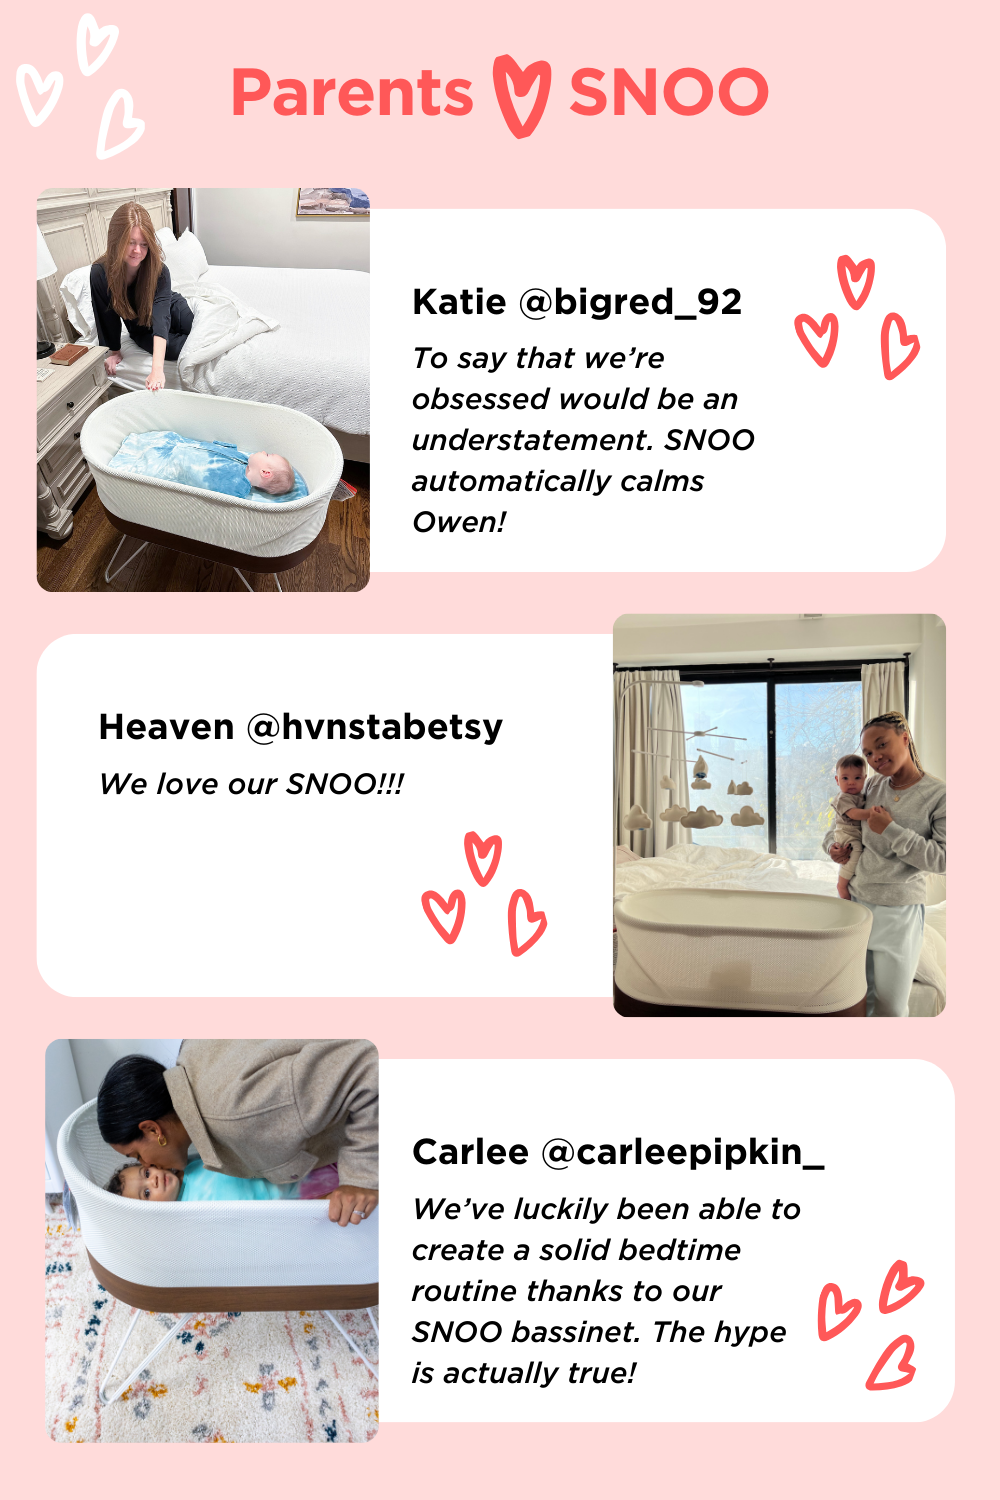 Parents ❤️ SNOO. Katie @bigred_92. To say that we’re obsessed would be an understatement. SNOO automatically calms Owen! Heaven @hvnstabetsy We love our SNOO!!! Carle @carleepipkin_ We’ve luckily been able to create a solid bedtime routine thanks to our SNOO bassinet. The hype is actually true!